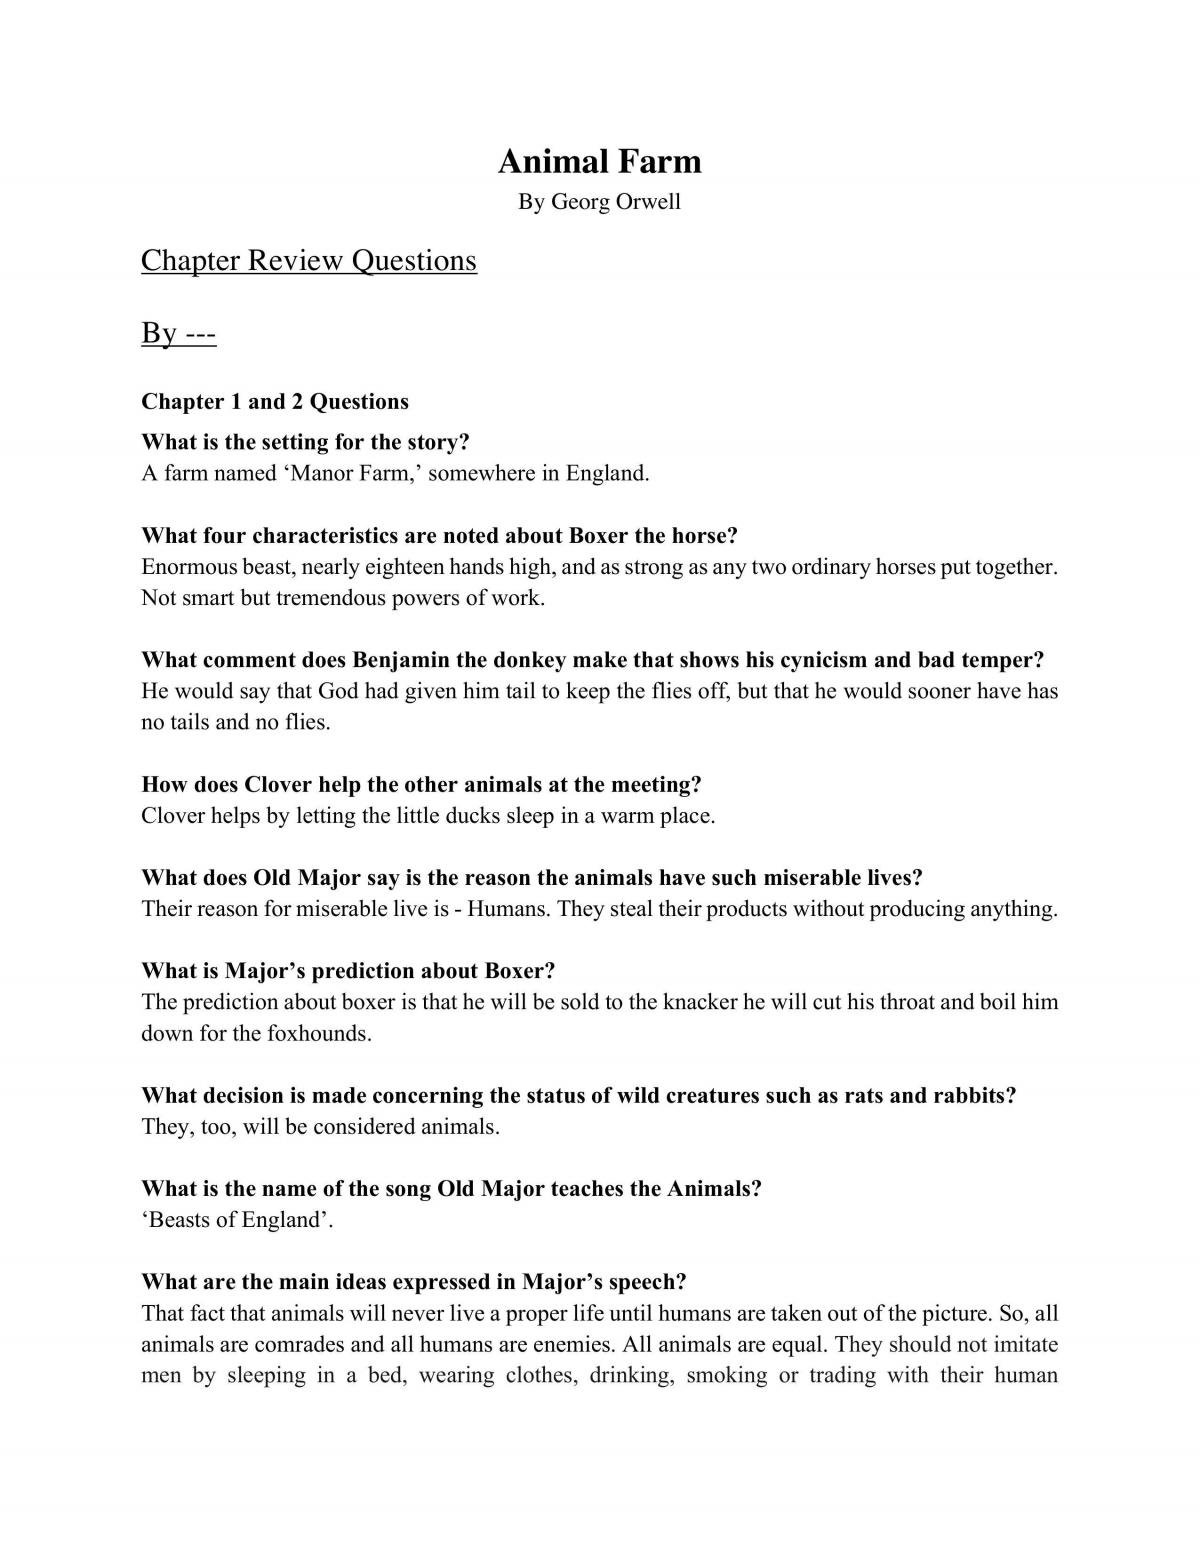 Animal Farm Chapter Question Notes | English - Year 11 SACE | Thinkswap